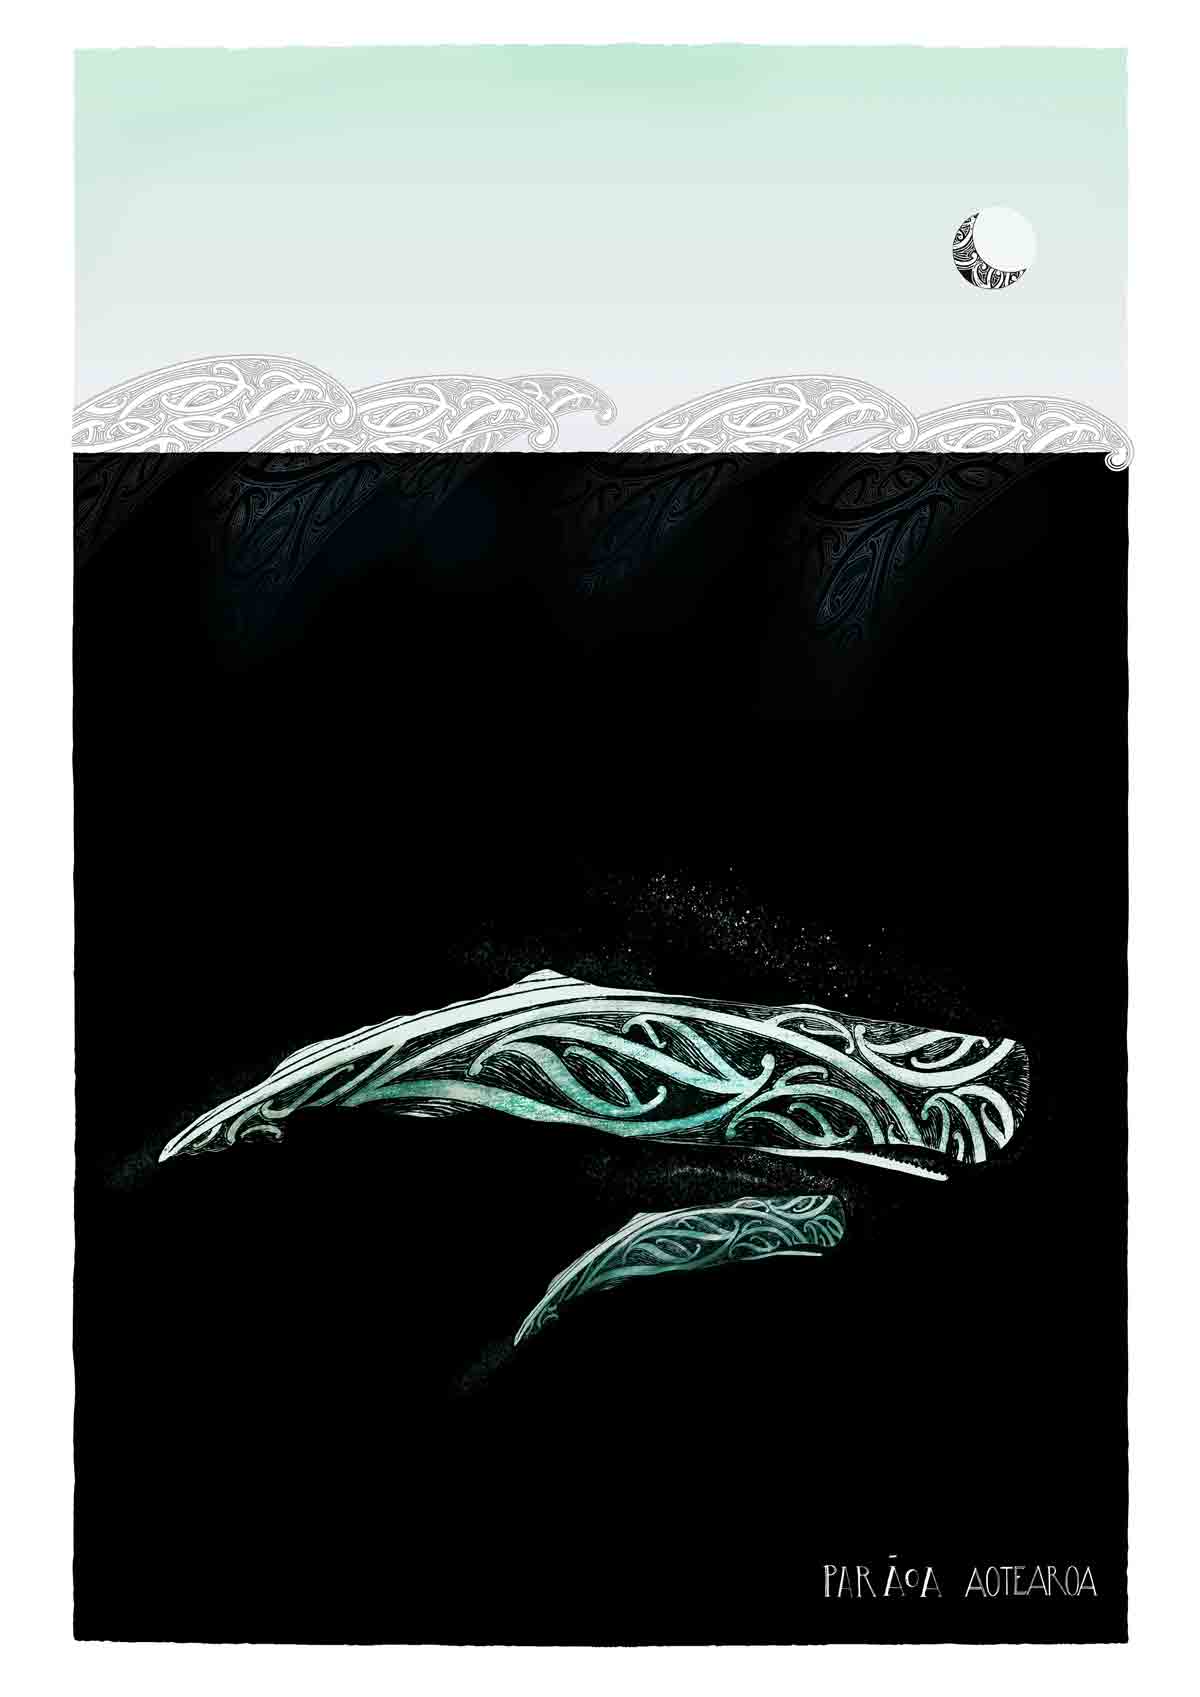 Parāoa whale print with maori art design new zealand whale and calf with te reo maori. Limited edition nz art print by Amber Smith